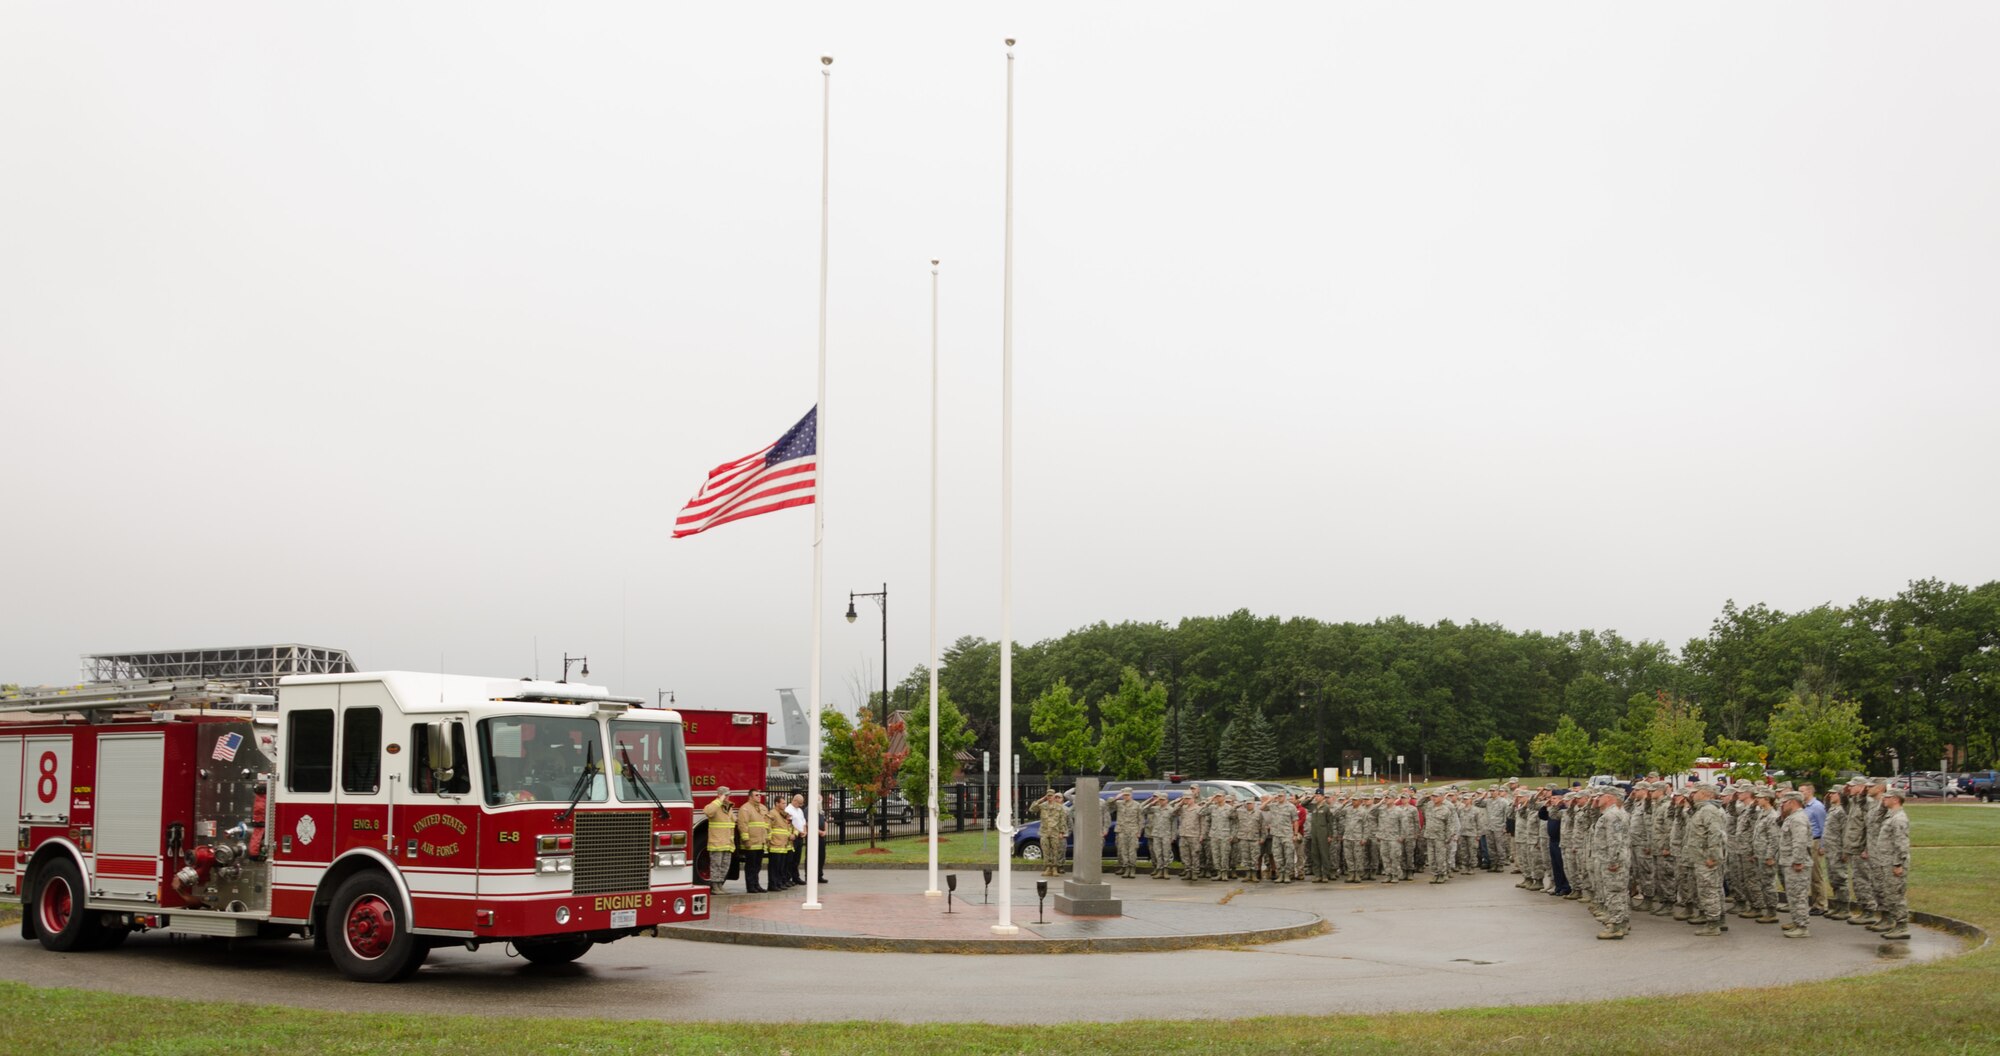 New Hampshire Air National Guard Airmen gather to remember the terrorist attacks of September 11, 2001 and pay tribute to the victims and families of those lost in New York, Pennsylvania and in the Pentagon, Pease Air National Guard Base, N.H, September 11, 2018. The 157th Air Refueling Wing continues to provide air refueling support for the War on Terror. Photo by Tech. Sgt. Aaron P. Vezeau, 157th ARW Public Affairs.